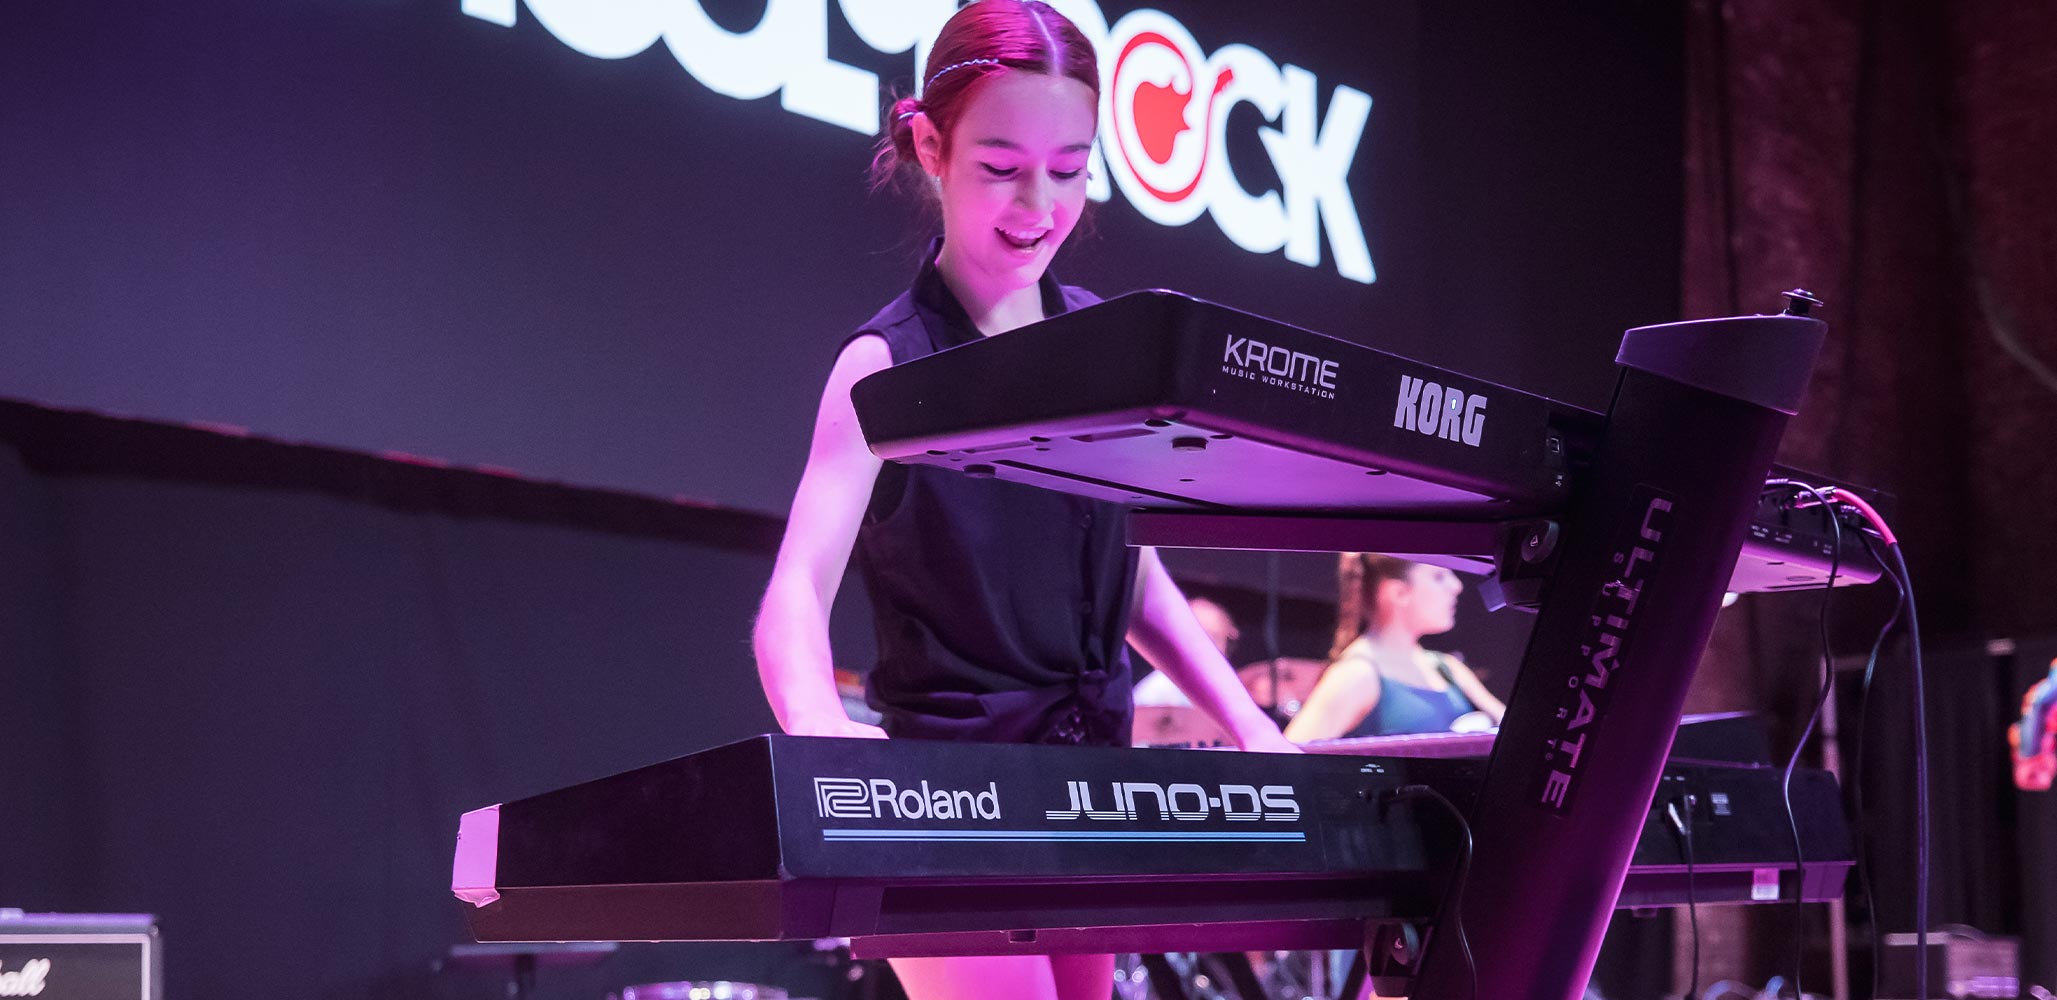 School of Rock student smiling while performing keys on stage